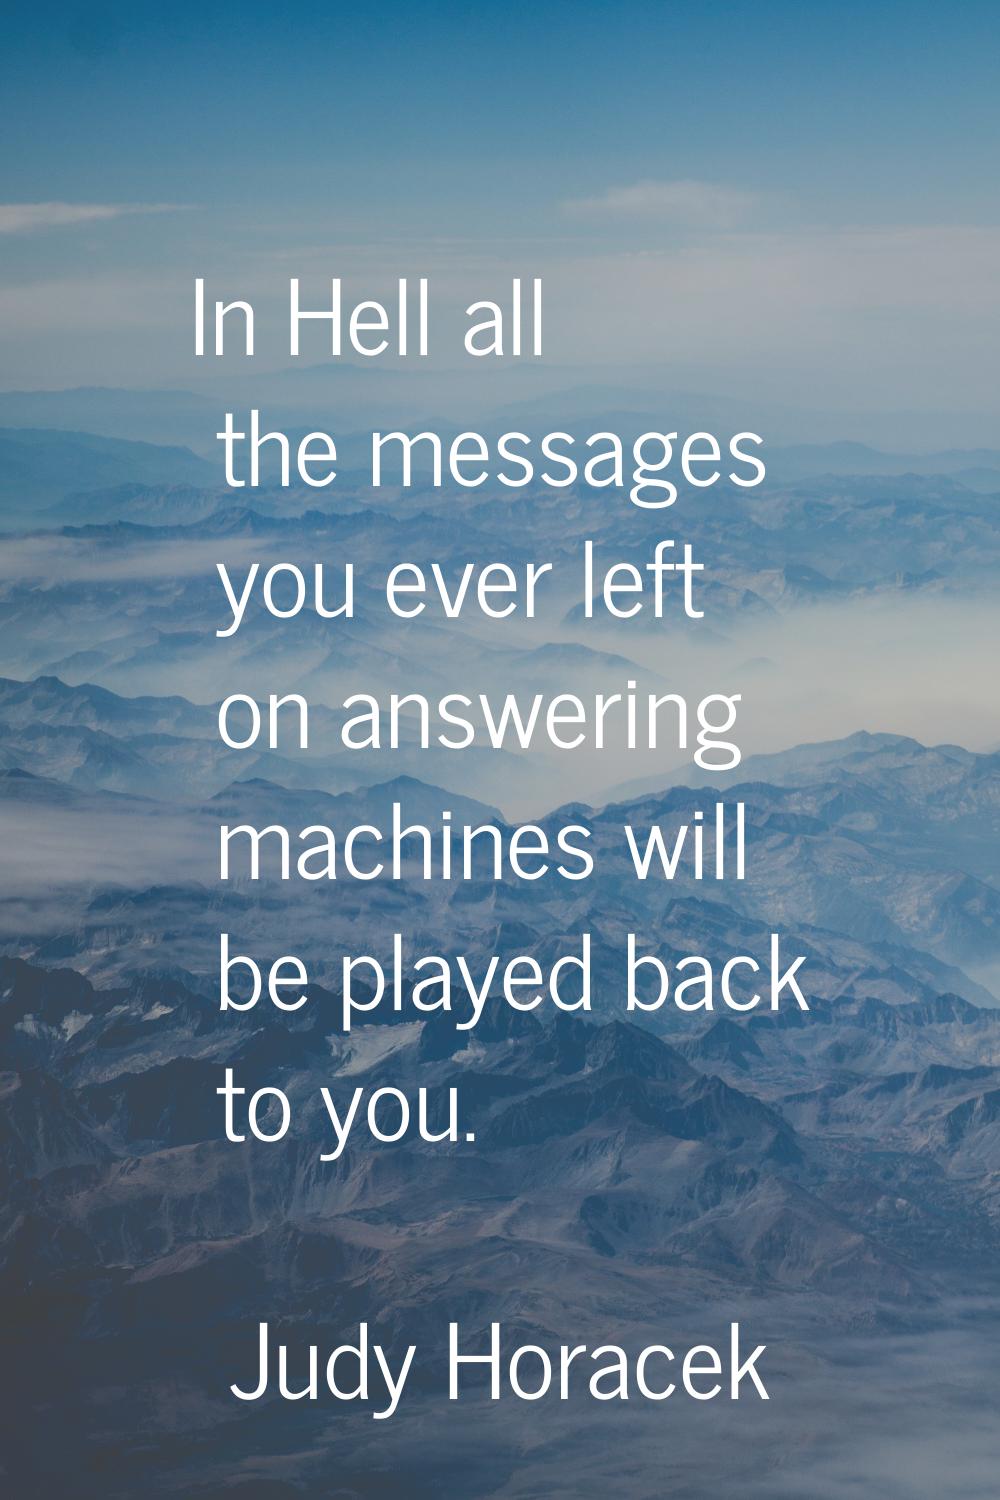 In Hell all the messages you ever left on answering machines will be played back to you.